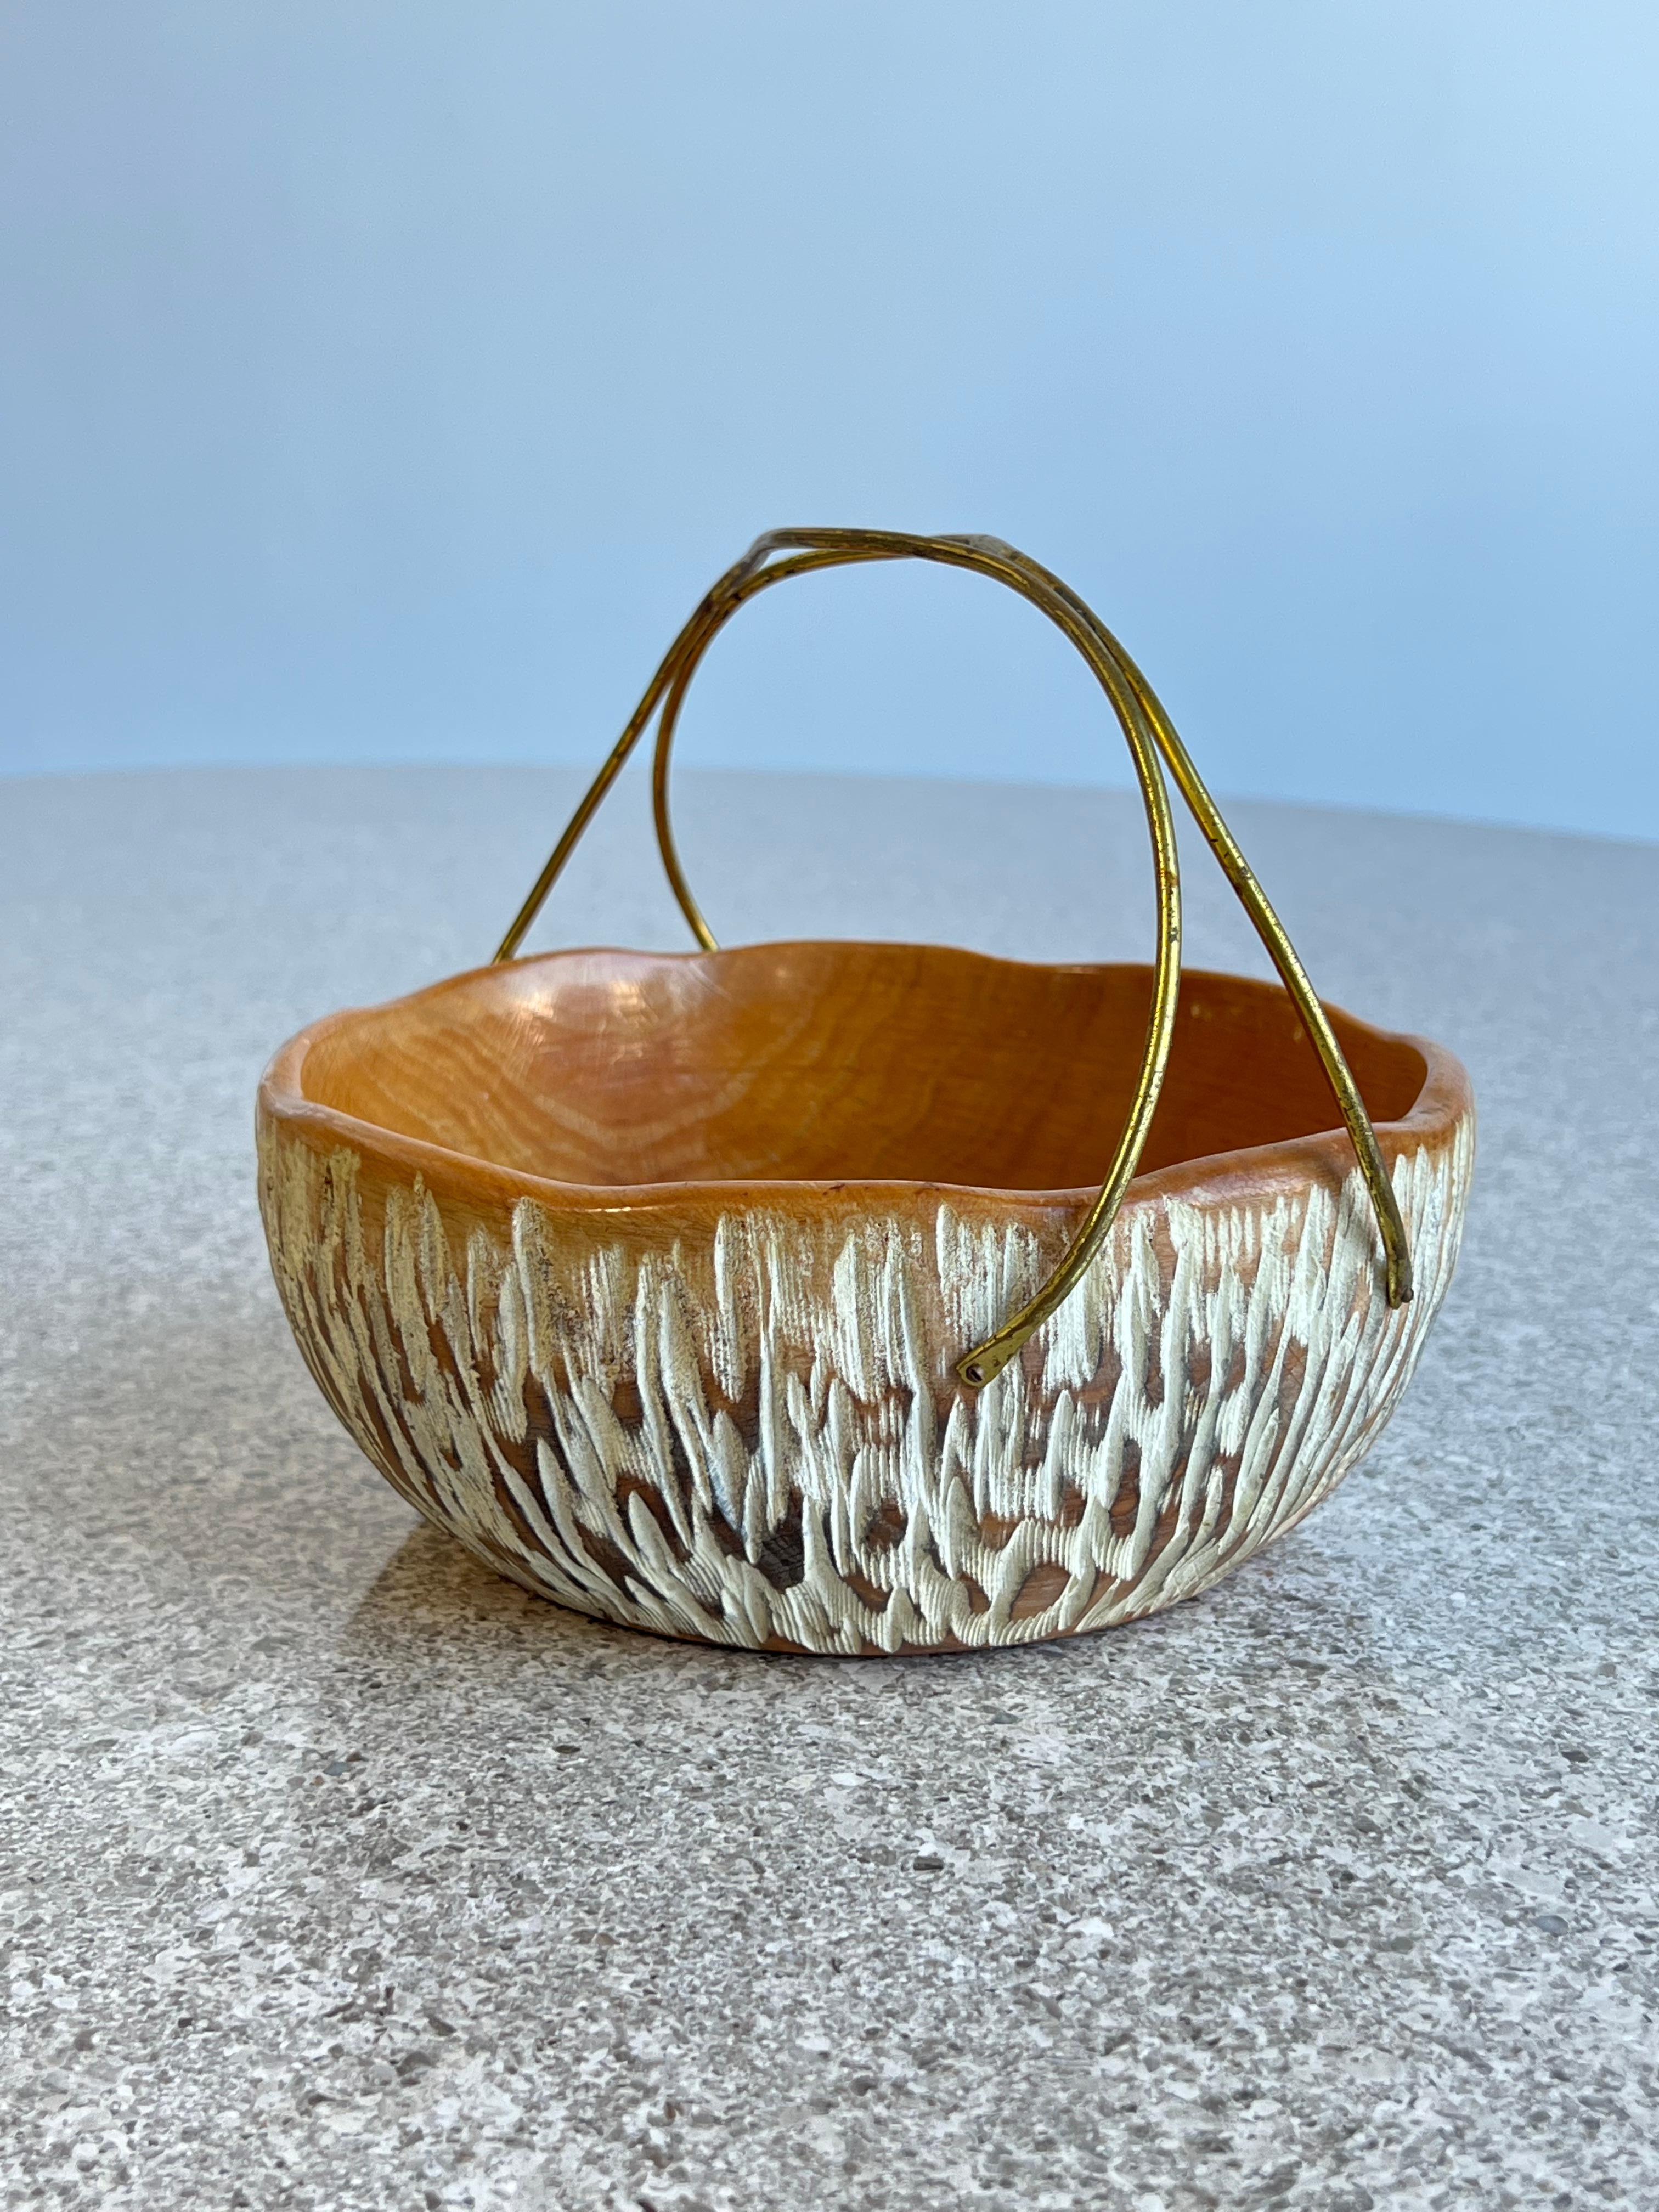 Aldo Tura for Macabo walnut basket centrepiece hand carved wood and brass, Italy, 1950s.
  